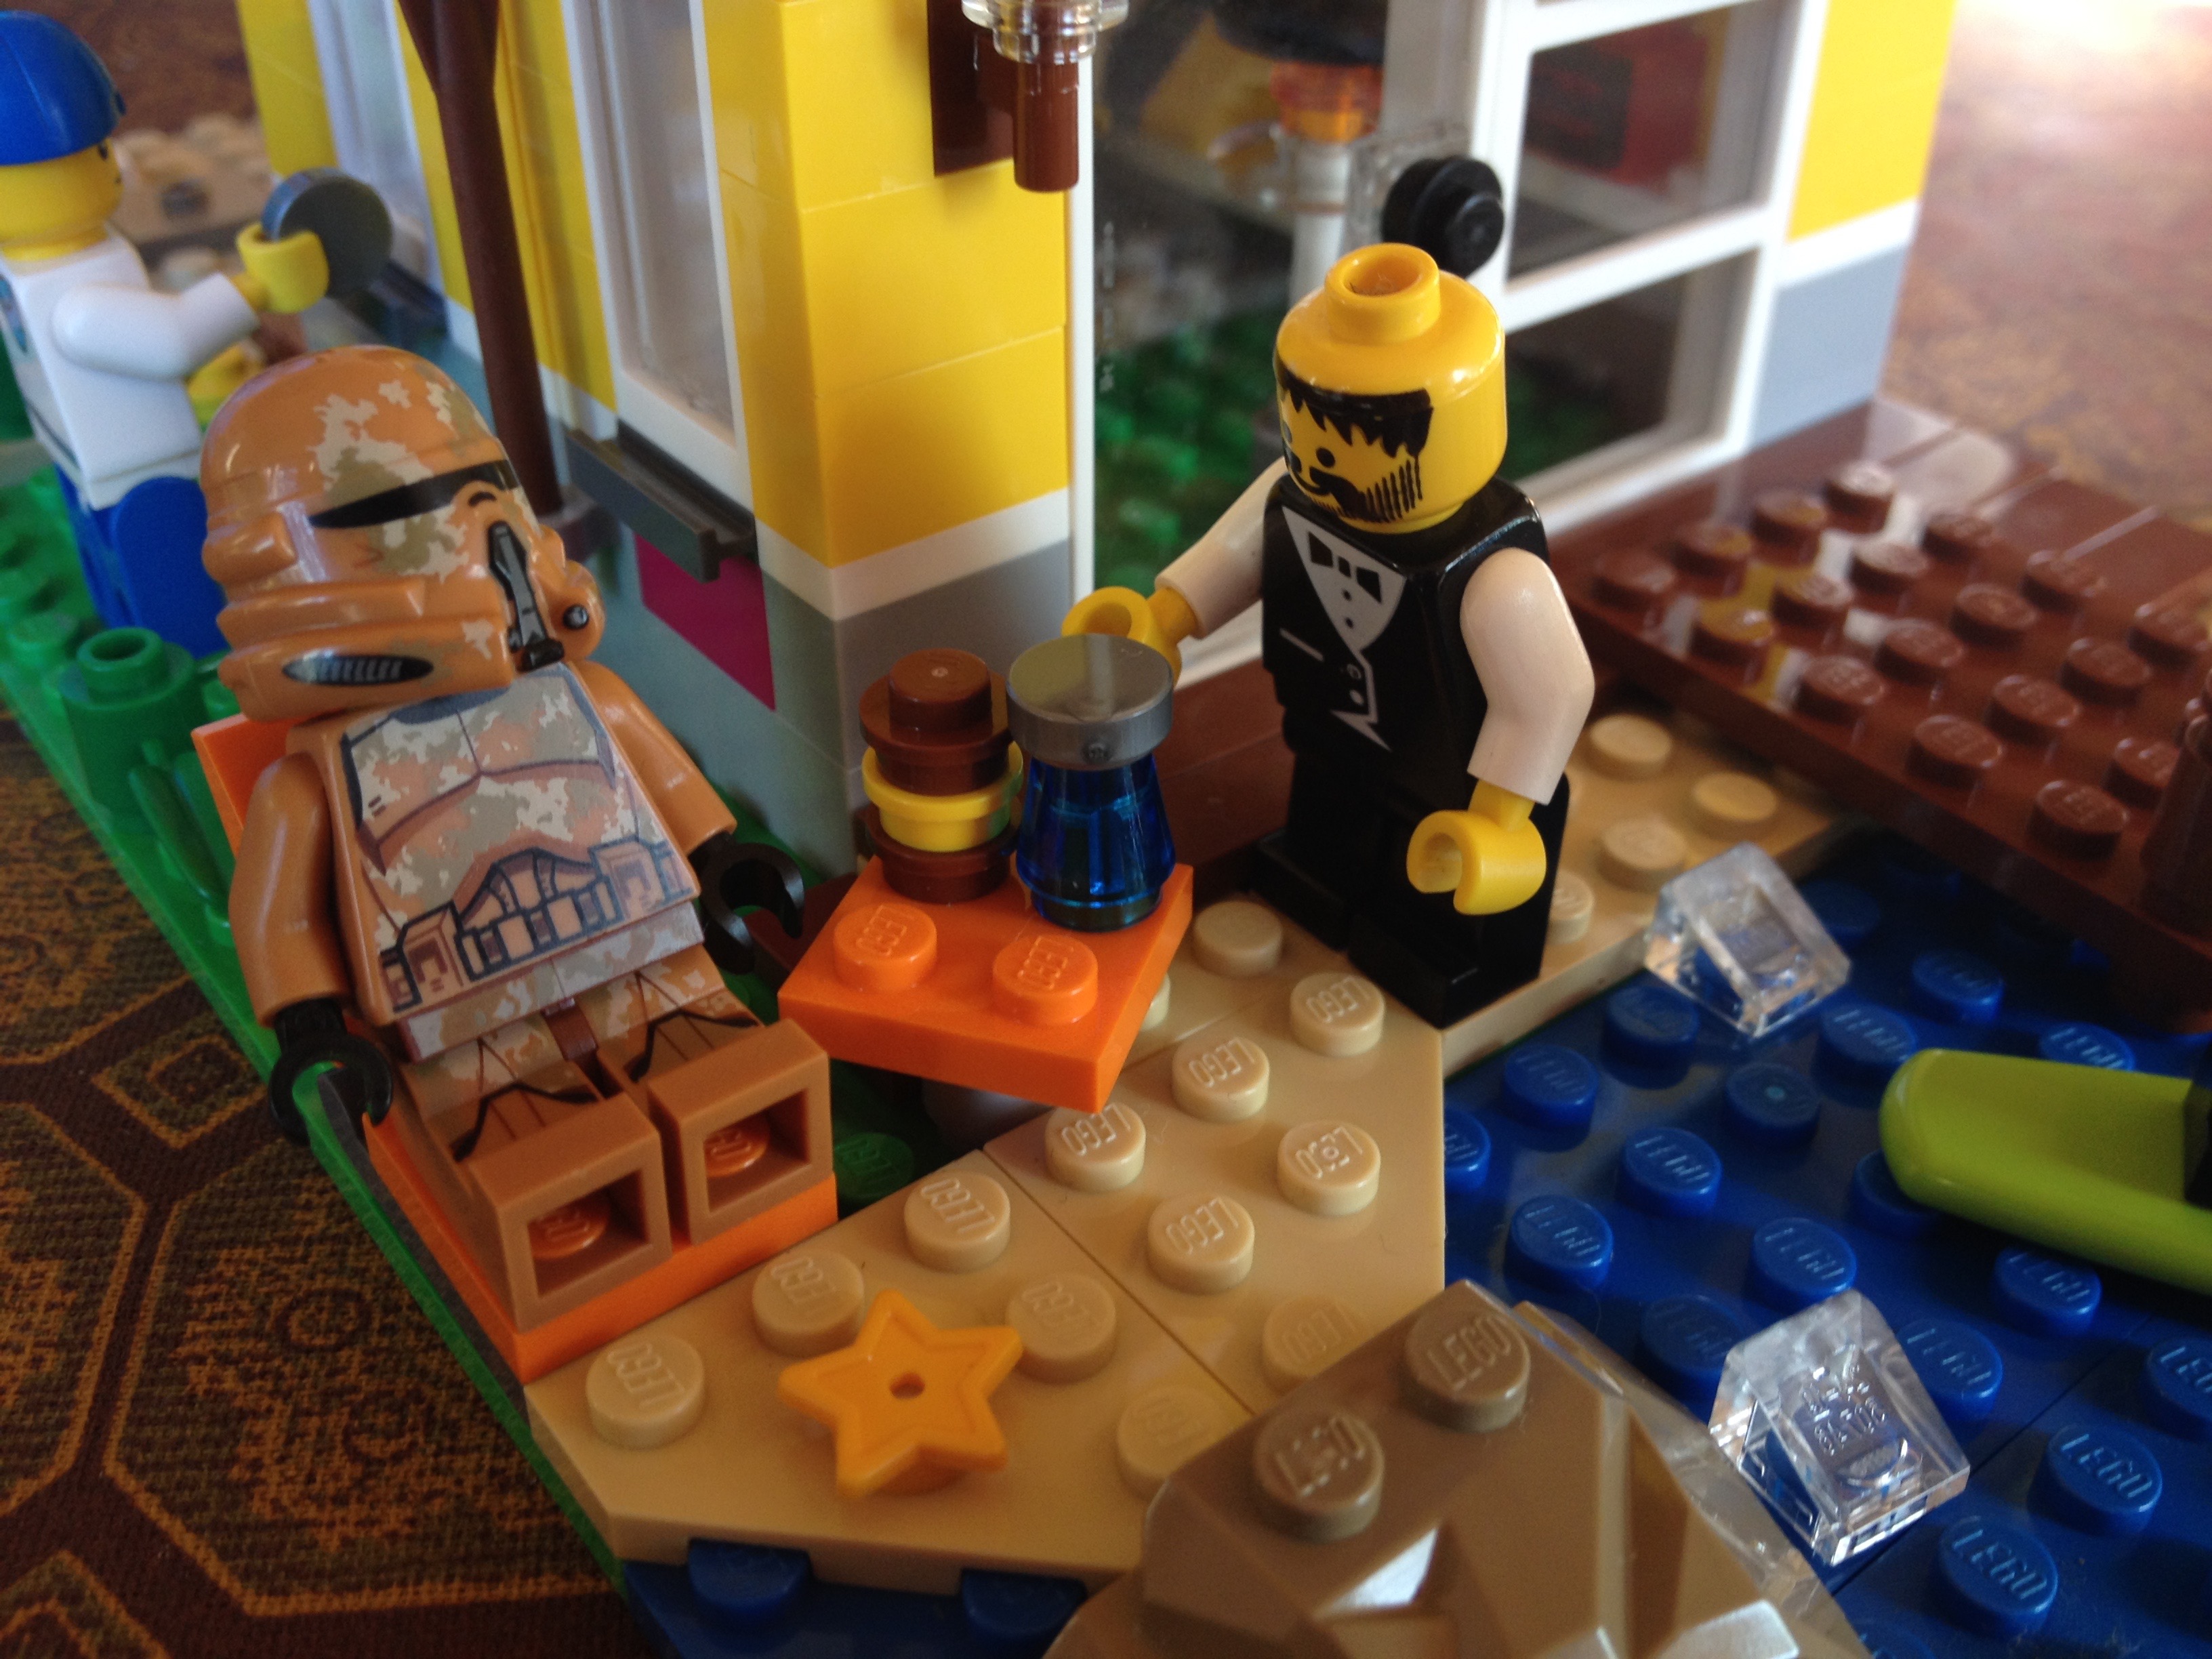 A lego waiter is giving a lego stormtrooper a lego grilled cheese sandwich and a lego cup of water, the lego stormtrooper is sitting in a lego deck chair next to the beach.